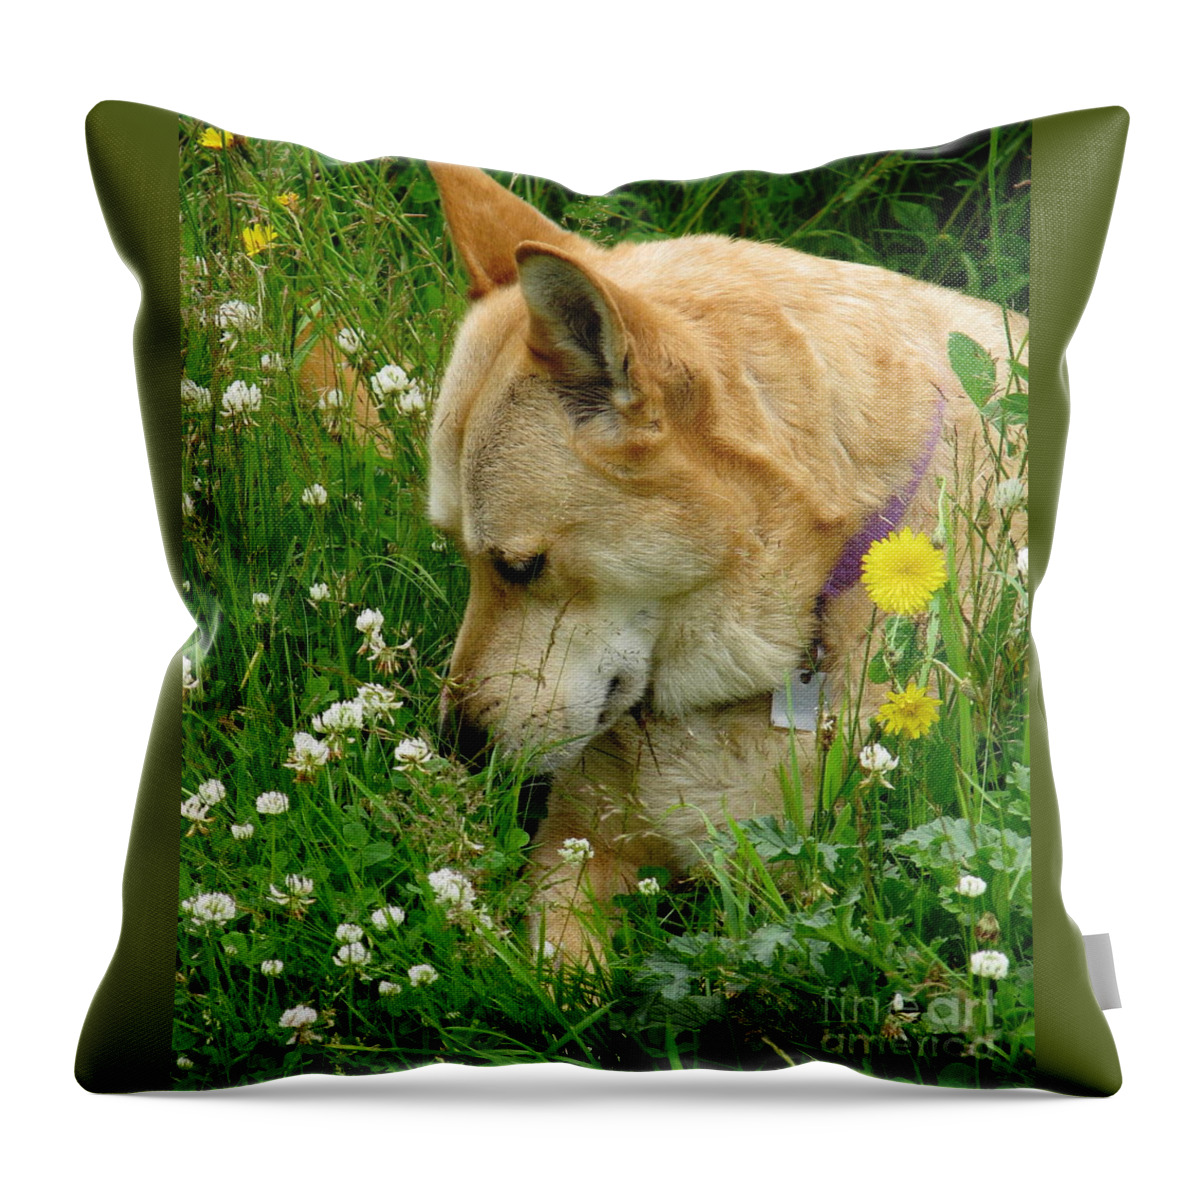 Dog Throw Pillow featuring the photograph Stop And Smell The Clover by Rory Siegel